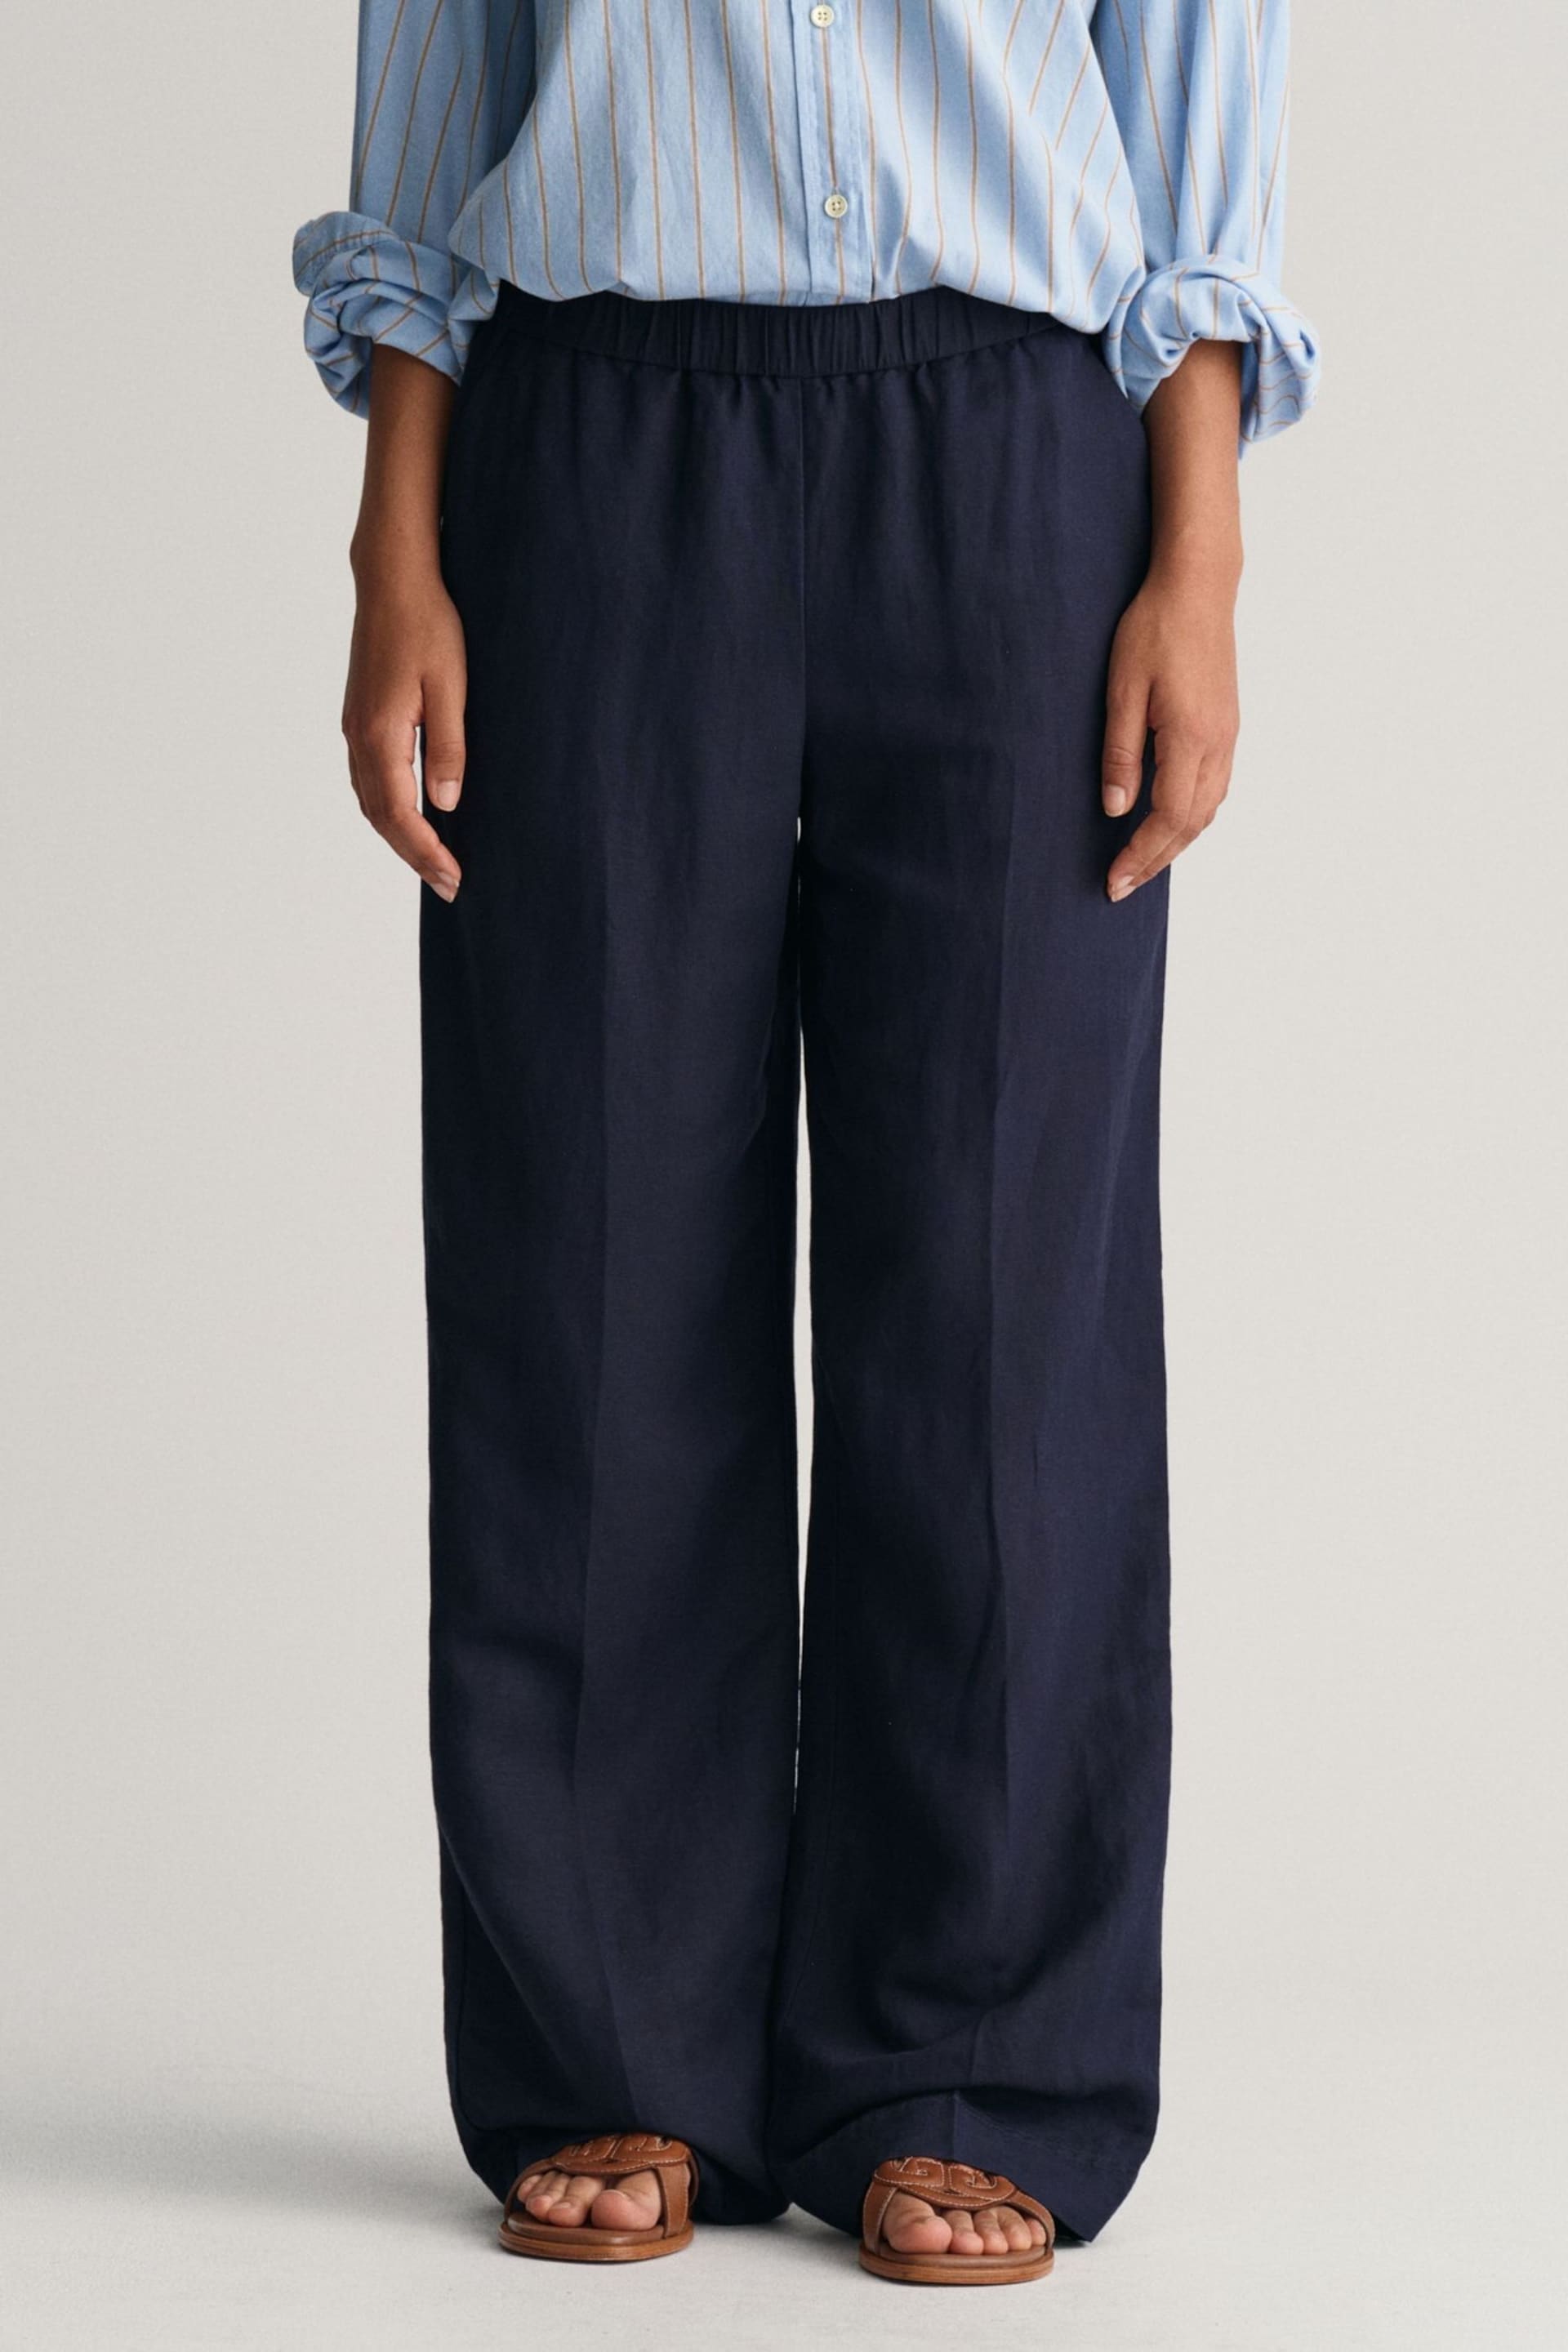 GANT Blue Relaxed Fit Linen Blend Pull-On Trousers - Image 4 of 6